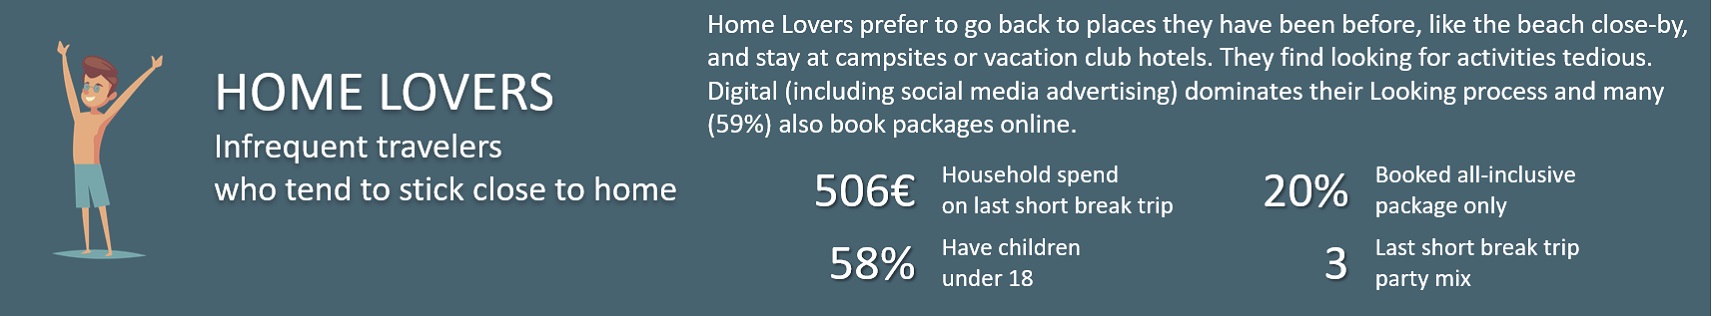 Consumer-journey-strategic-research-home-lovers